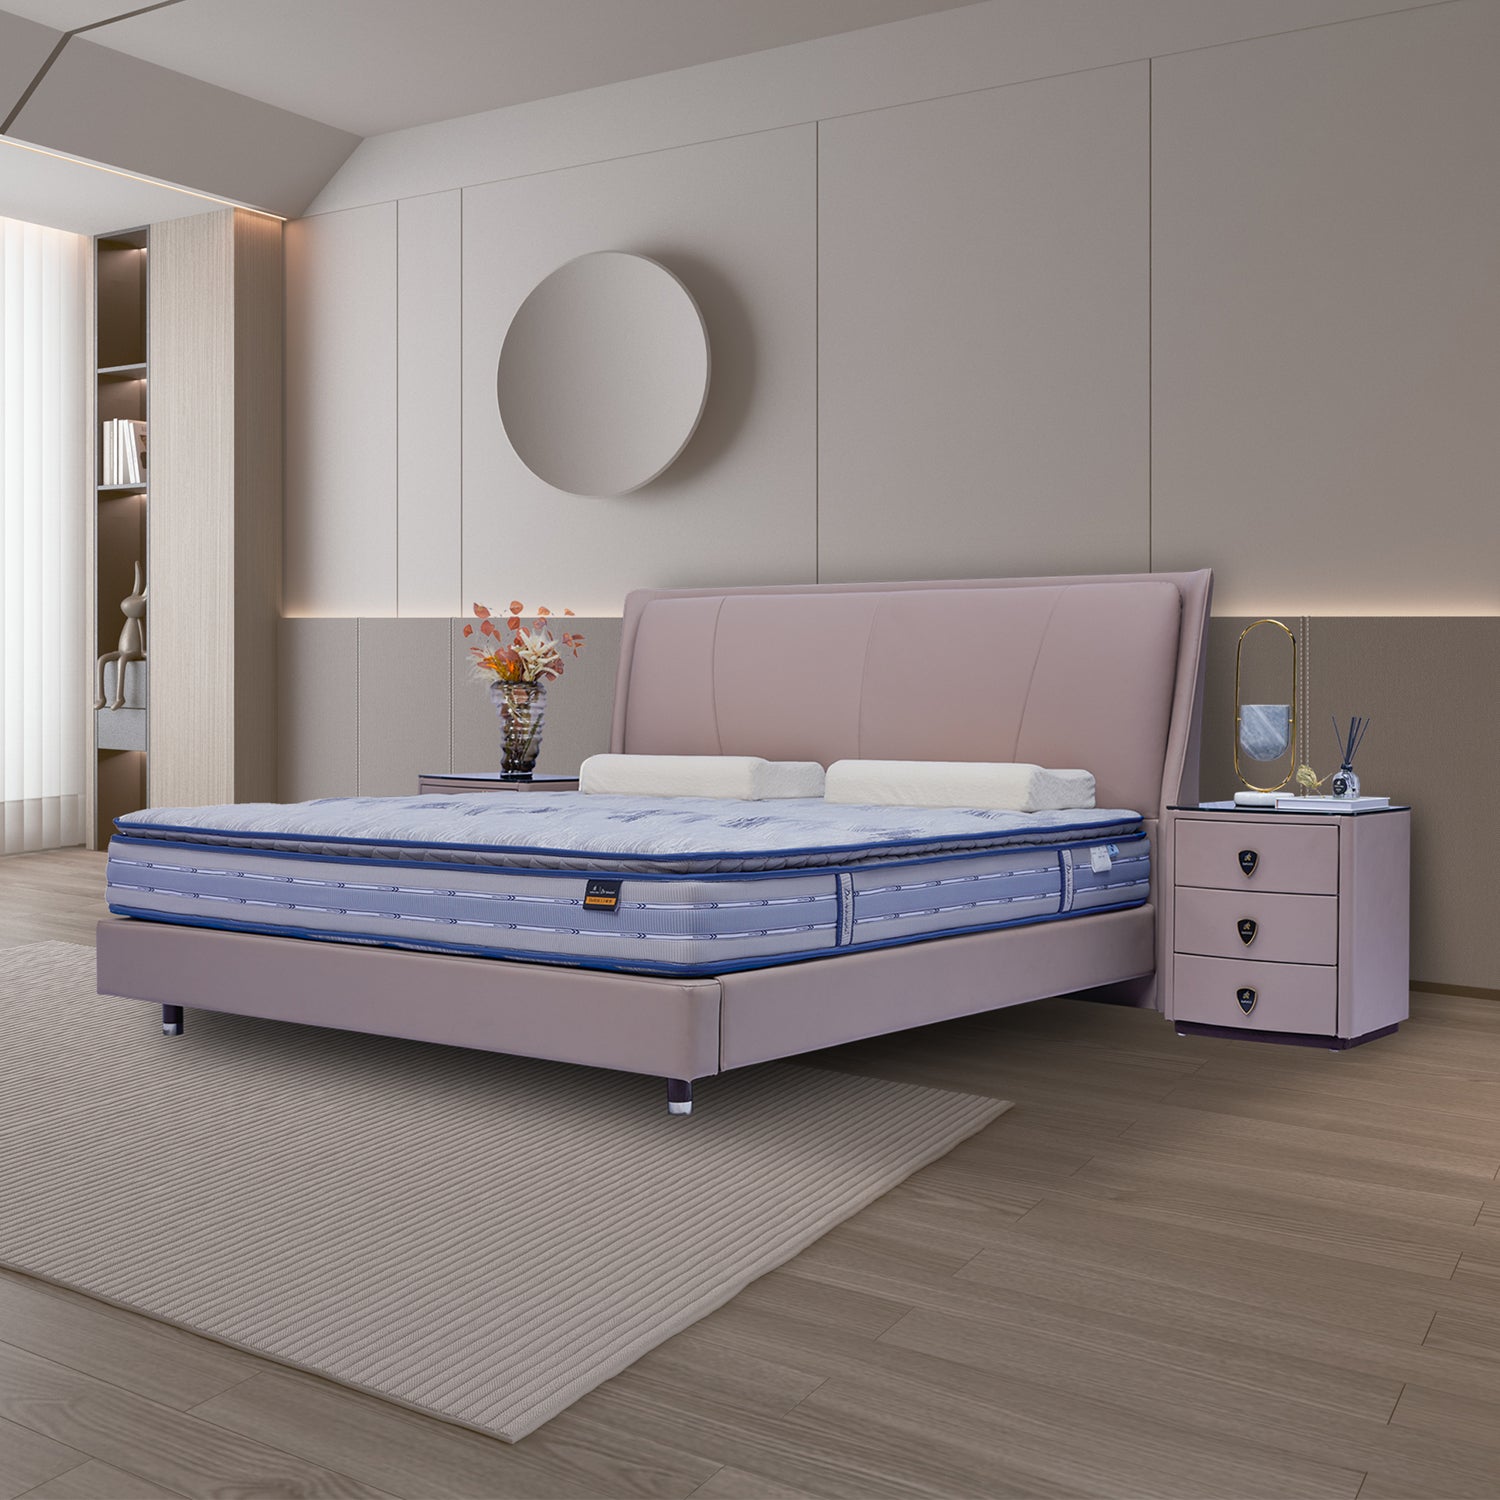 DeRUCCI Bed Frame BOC1 - 018 in light pink fabric with a blue mattress, placed in a modern bedroom setting with a matching nightstand and elegant decor.